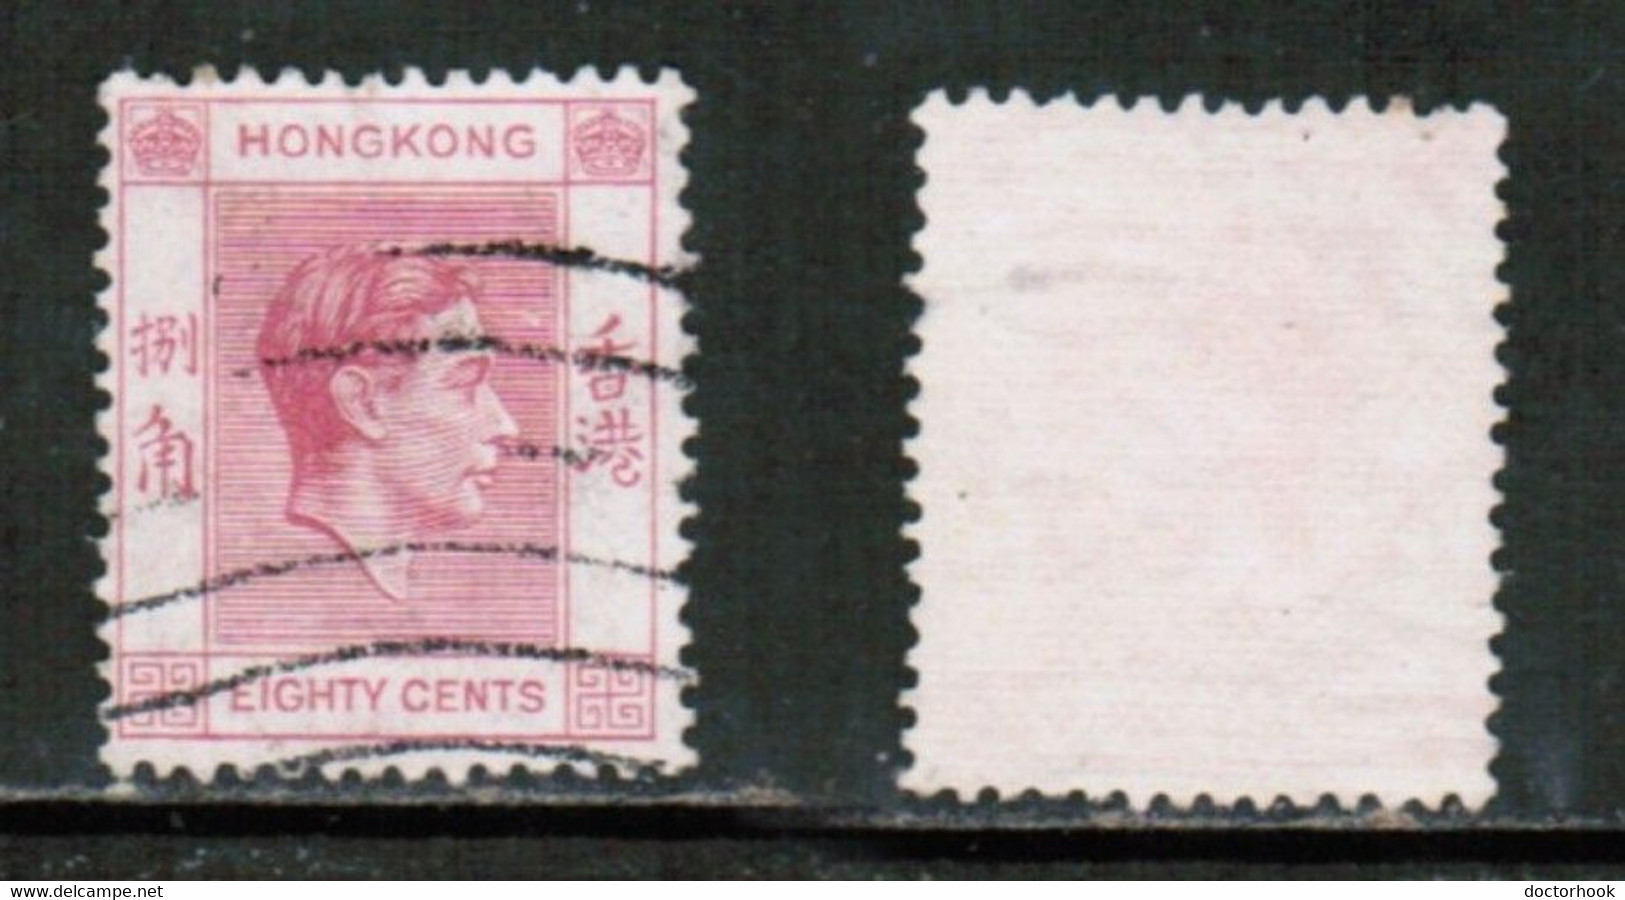 HONG KONG   Scott # 162C USED (CONDITION AS PER SCAN) (Stamp Scan # 850-17) - Used Stamps